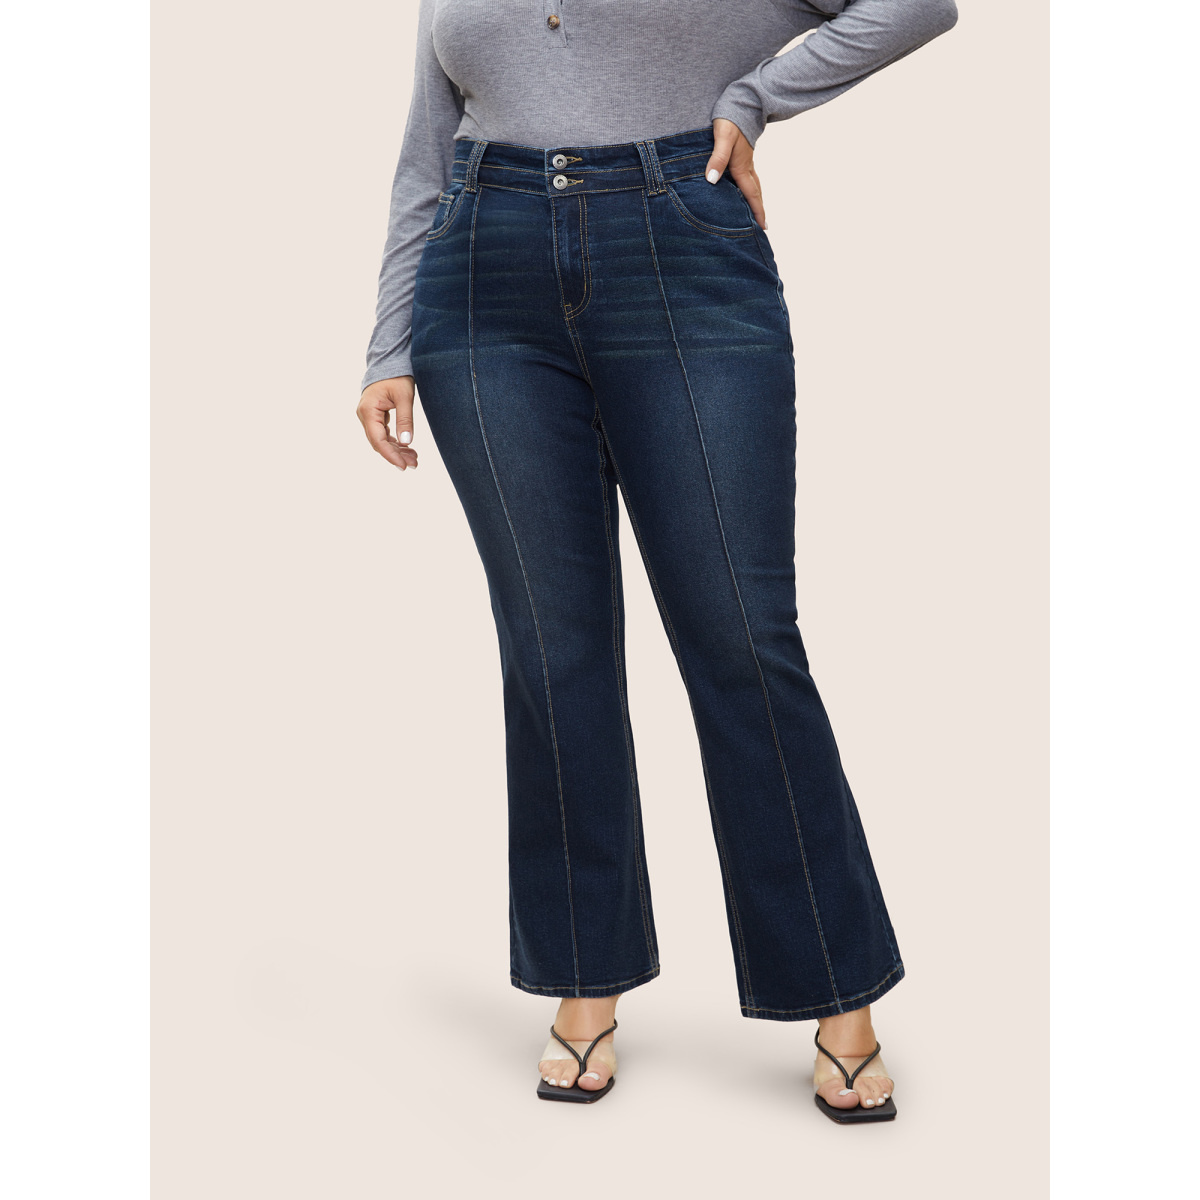 

Plus Size Bootcut Seam Detail Button Up Full Length Jeans Women Indigo Casual Plain Non High stretch Slanted pocket Jeans BloomChic